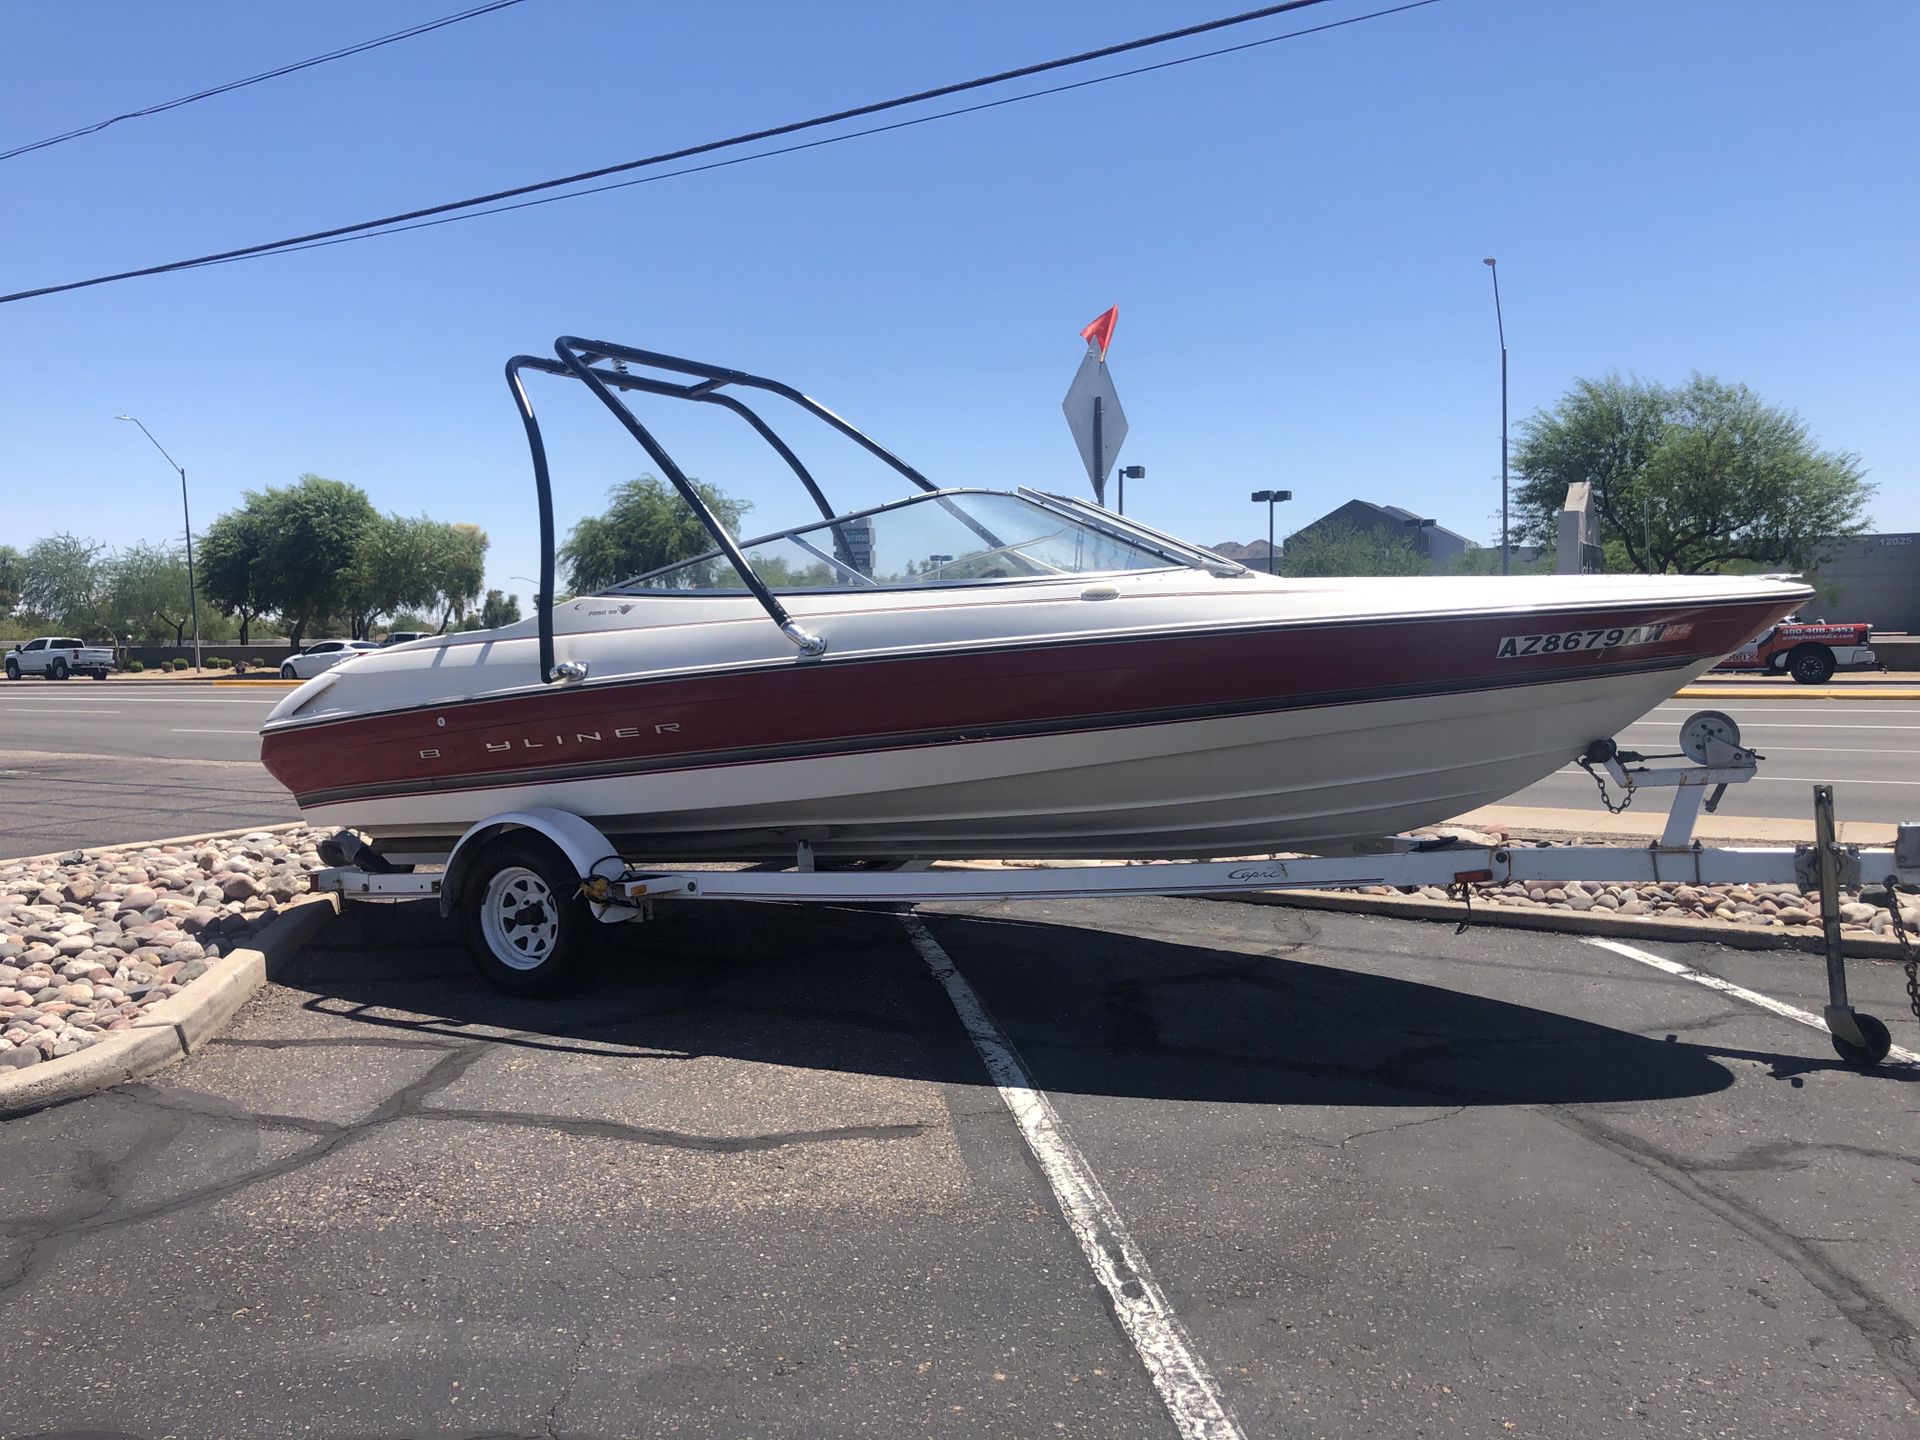 1997 Bayliner open bow 20 foot ski boat with a 350 motor runs excellent looking to sell today